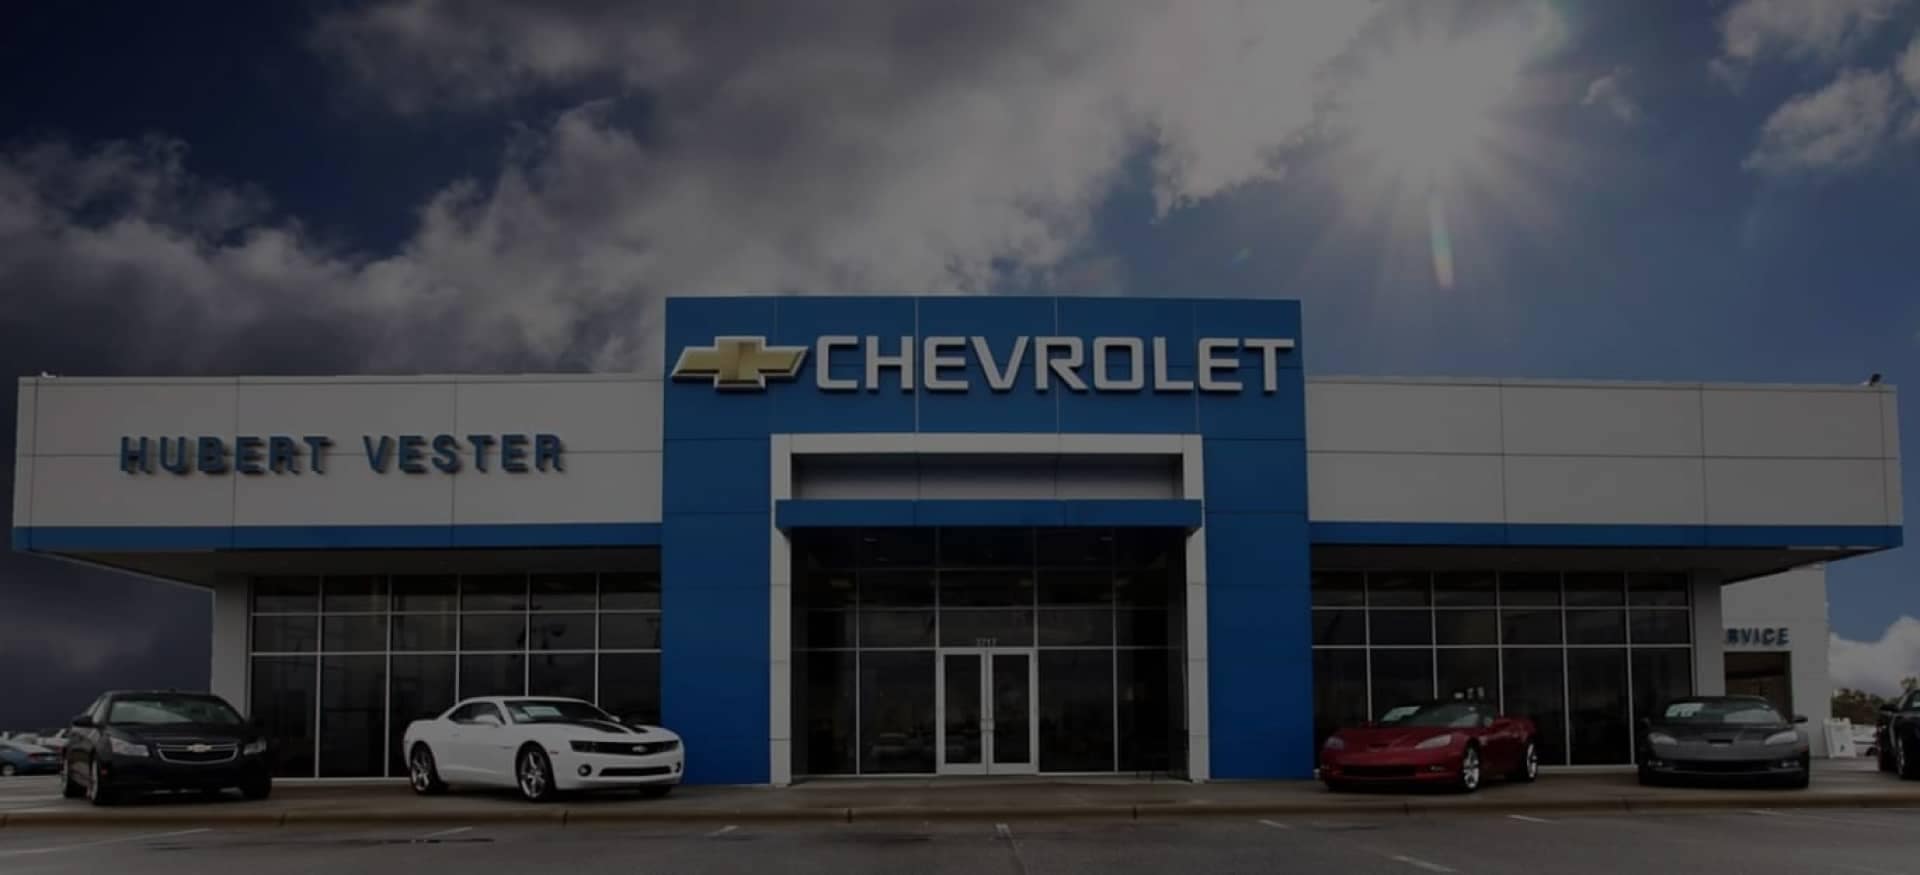 An exterior shot of a Chevrolet dealership in the day.